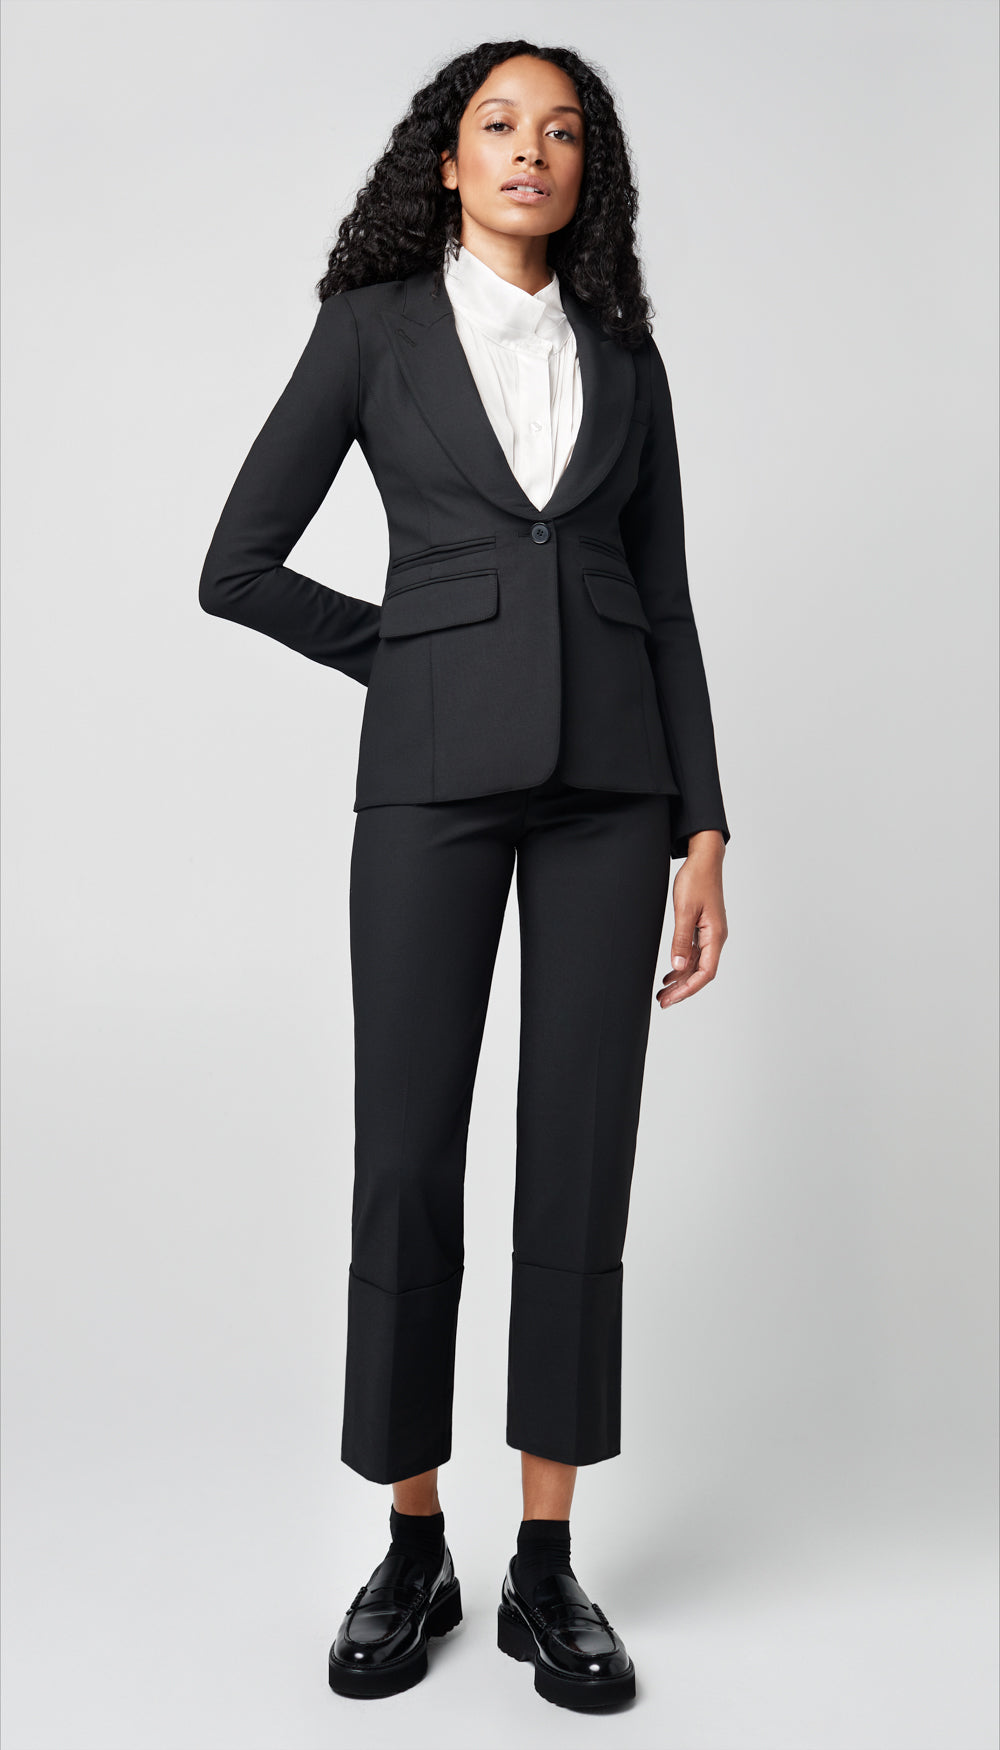 A woman in a solid black blazer and cuffed pant.